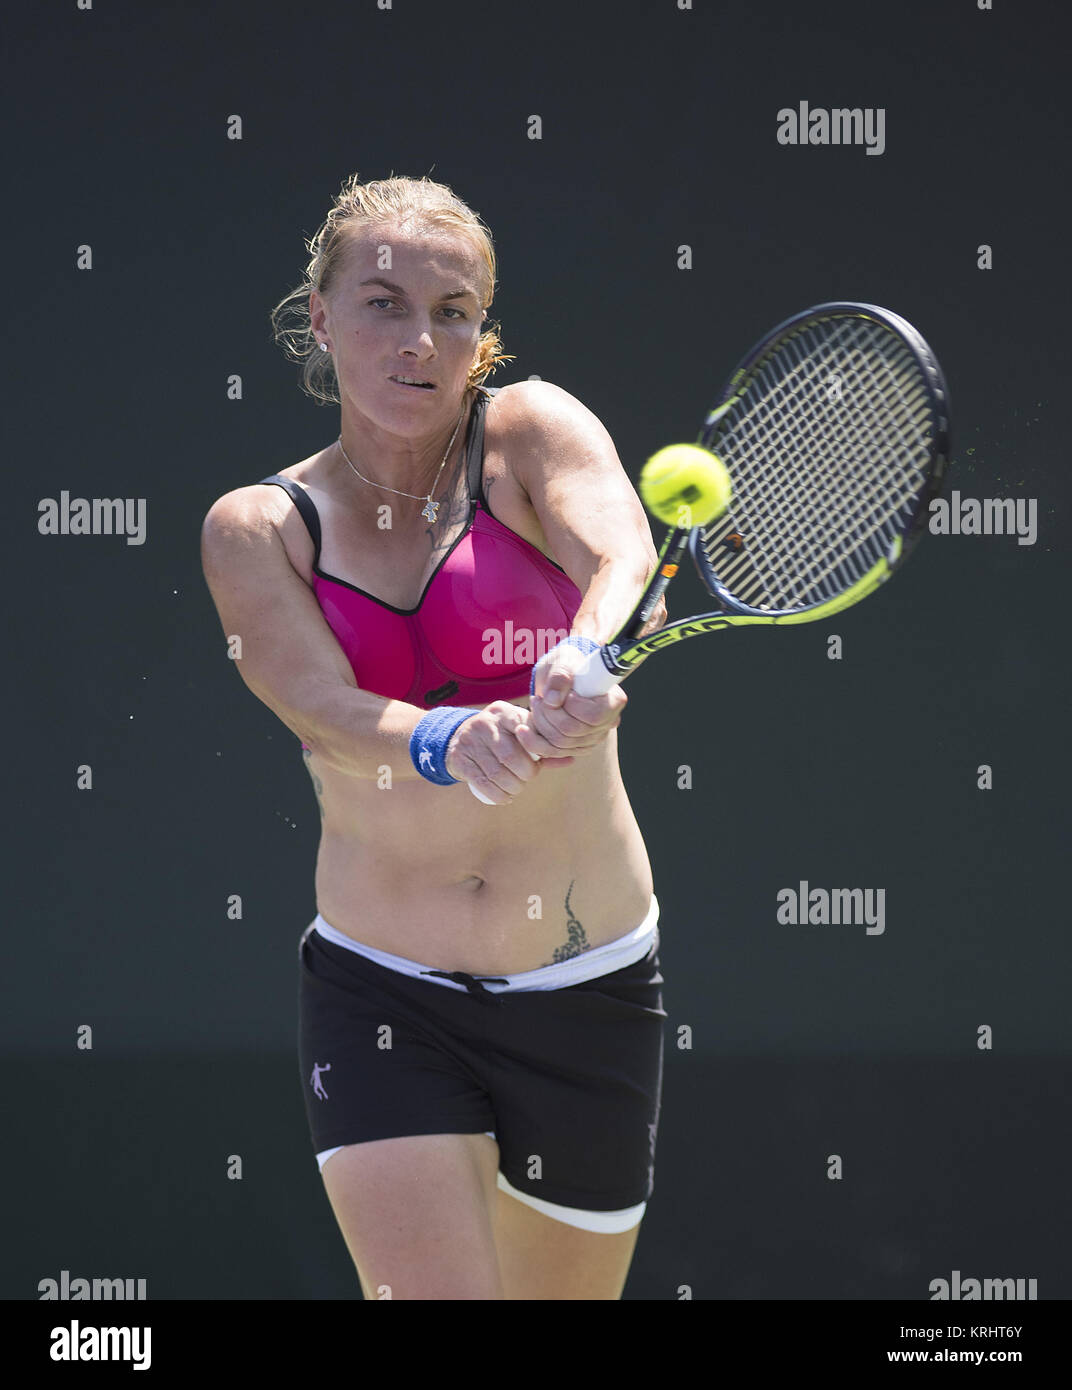 Key Biscayne, FL - March 26: Svetlana Kuznetsova (RUS) practices for the 2015 Miami Open on March 26, 2015 in Key Biscayne, Florida   People:  Svetlana Kuznetsova Stock Photo